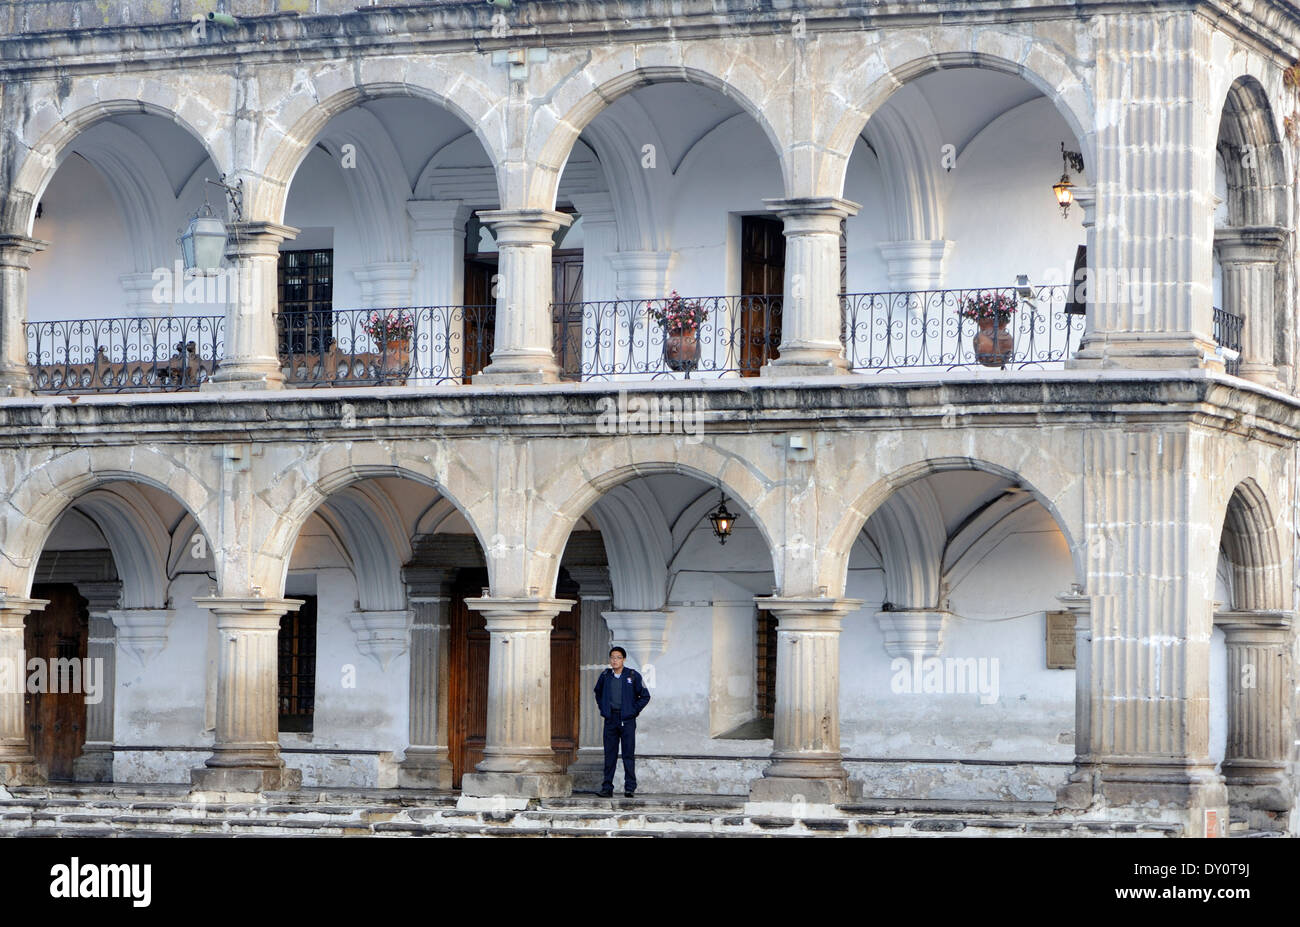 The robust stone colonnades of the 18th century El Ayuntamiento, the town hall, building on the north side of Parque Central. Stock Photo